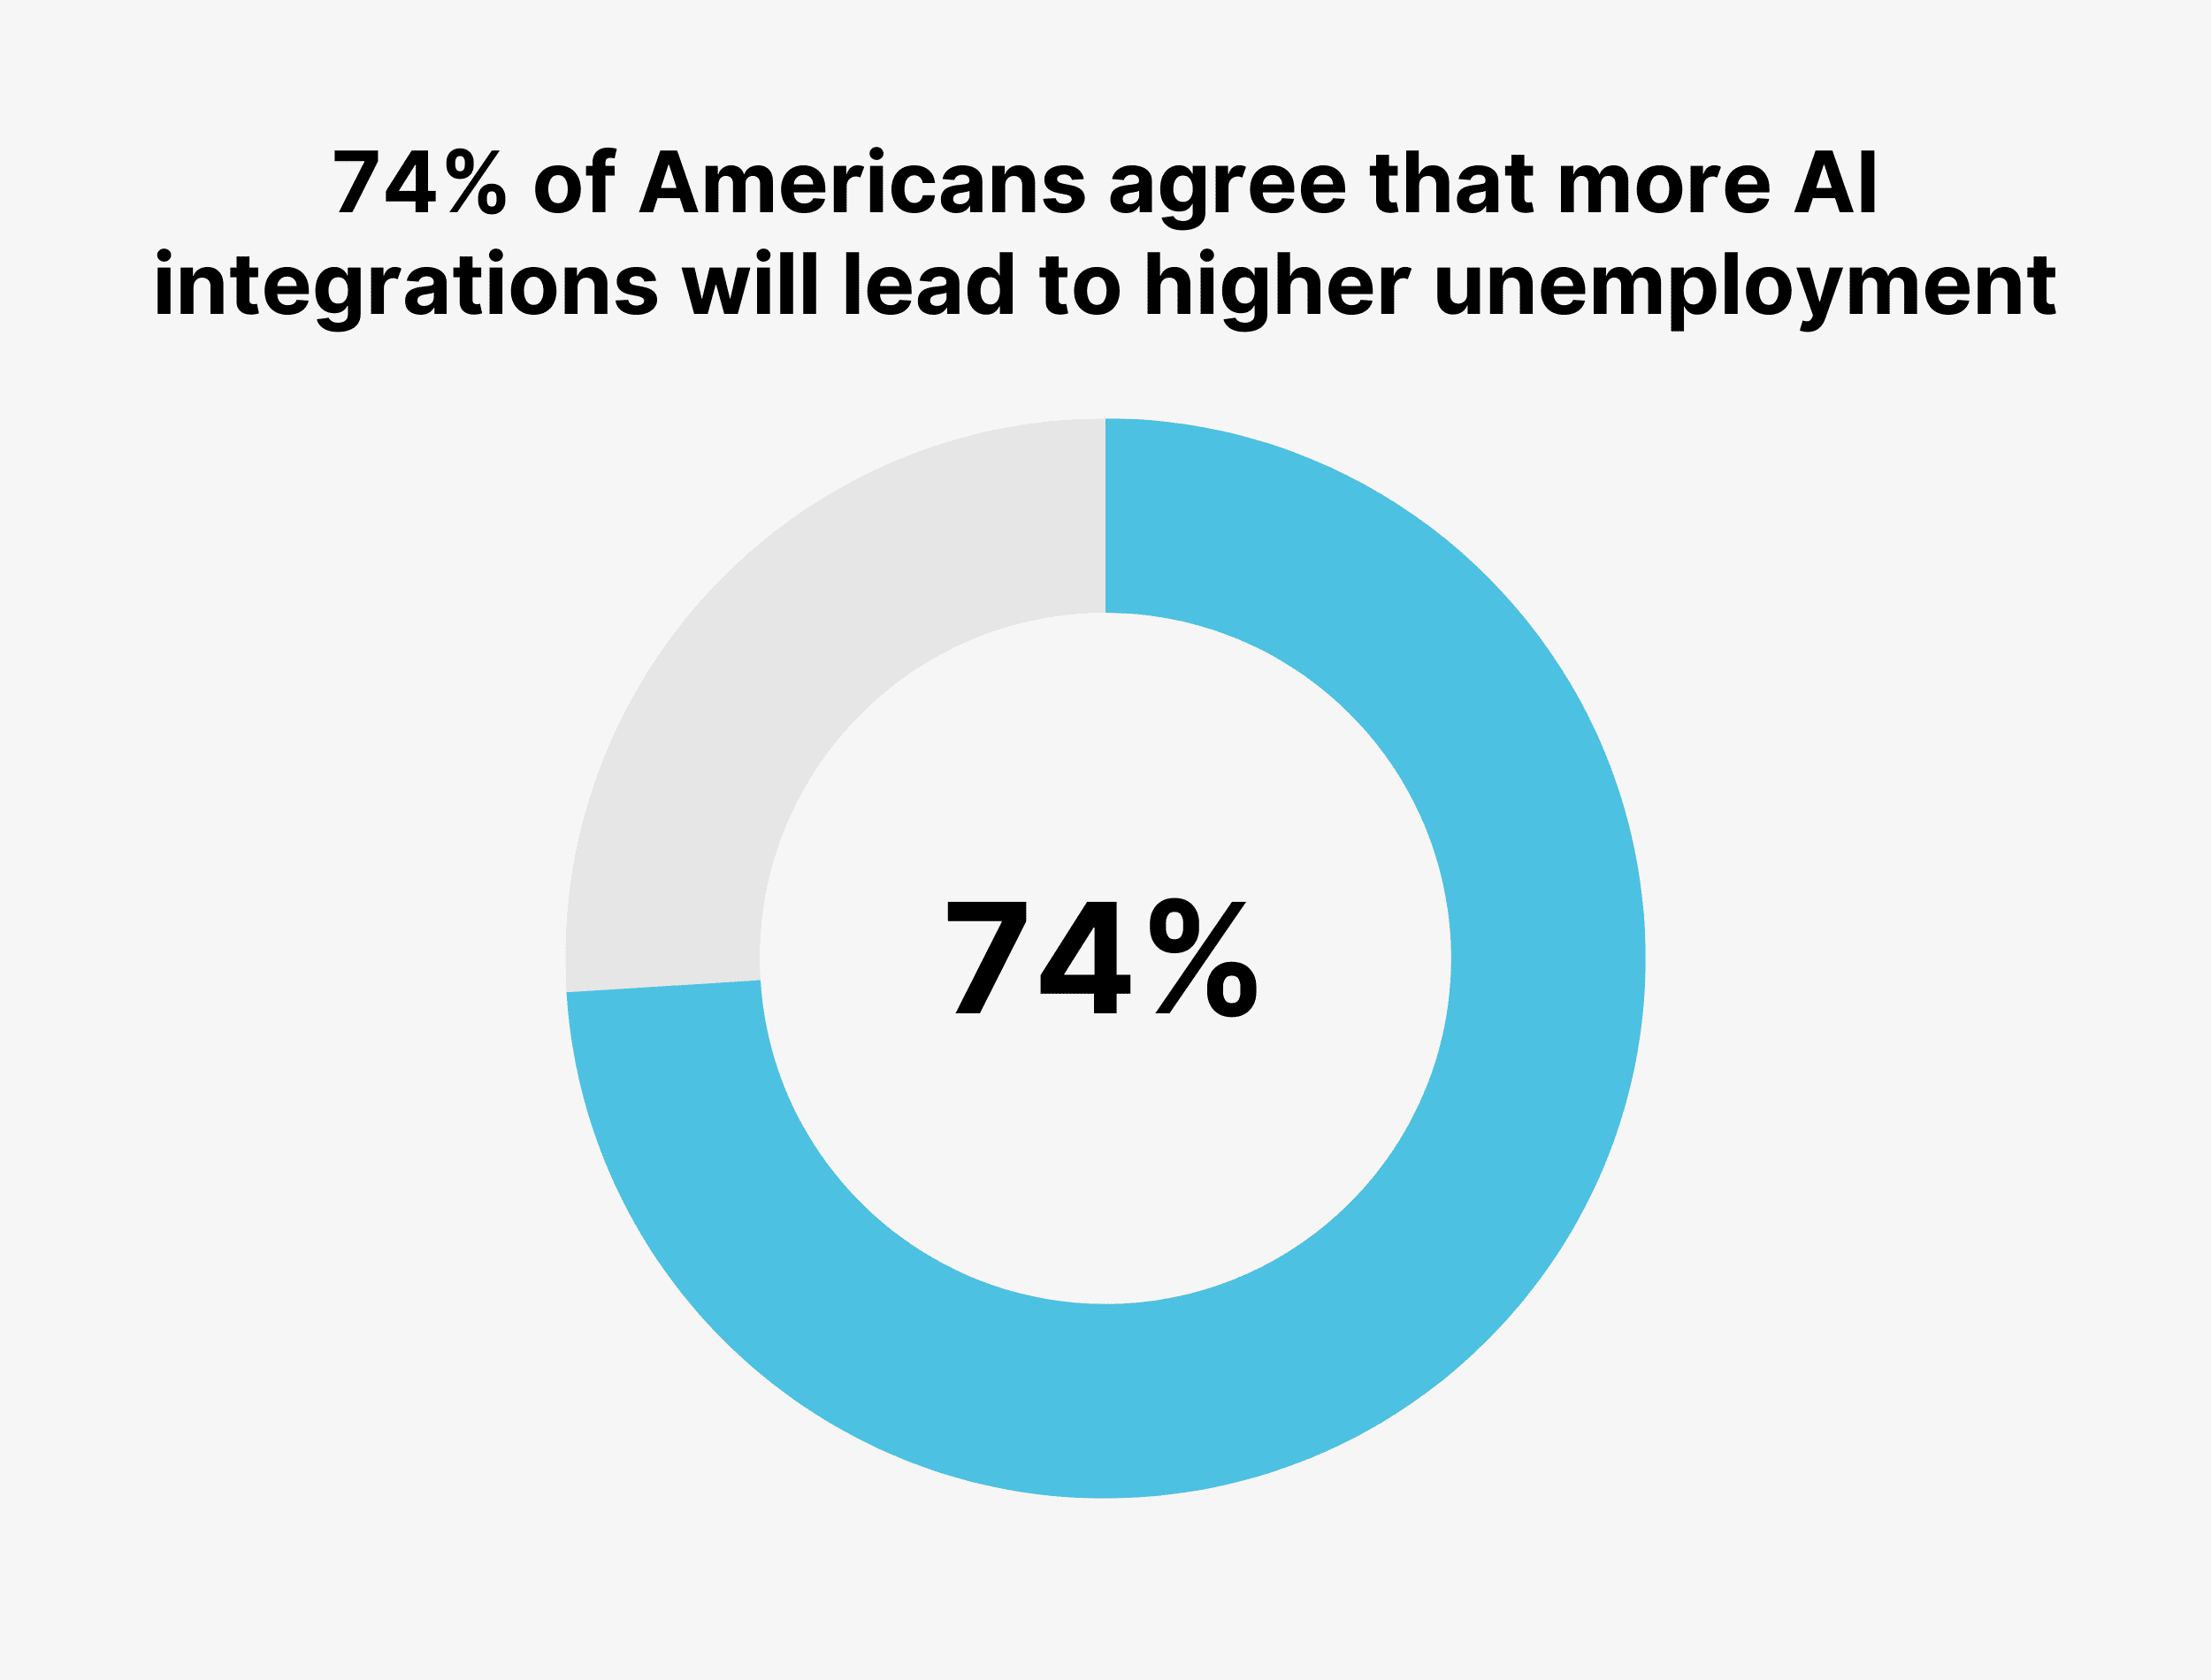 74% of Americans agree that more AI integrations will lead to higher unemployment